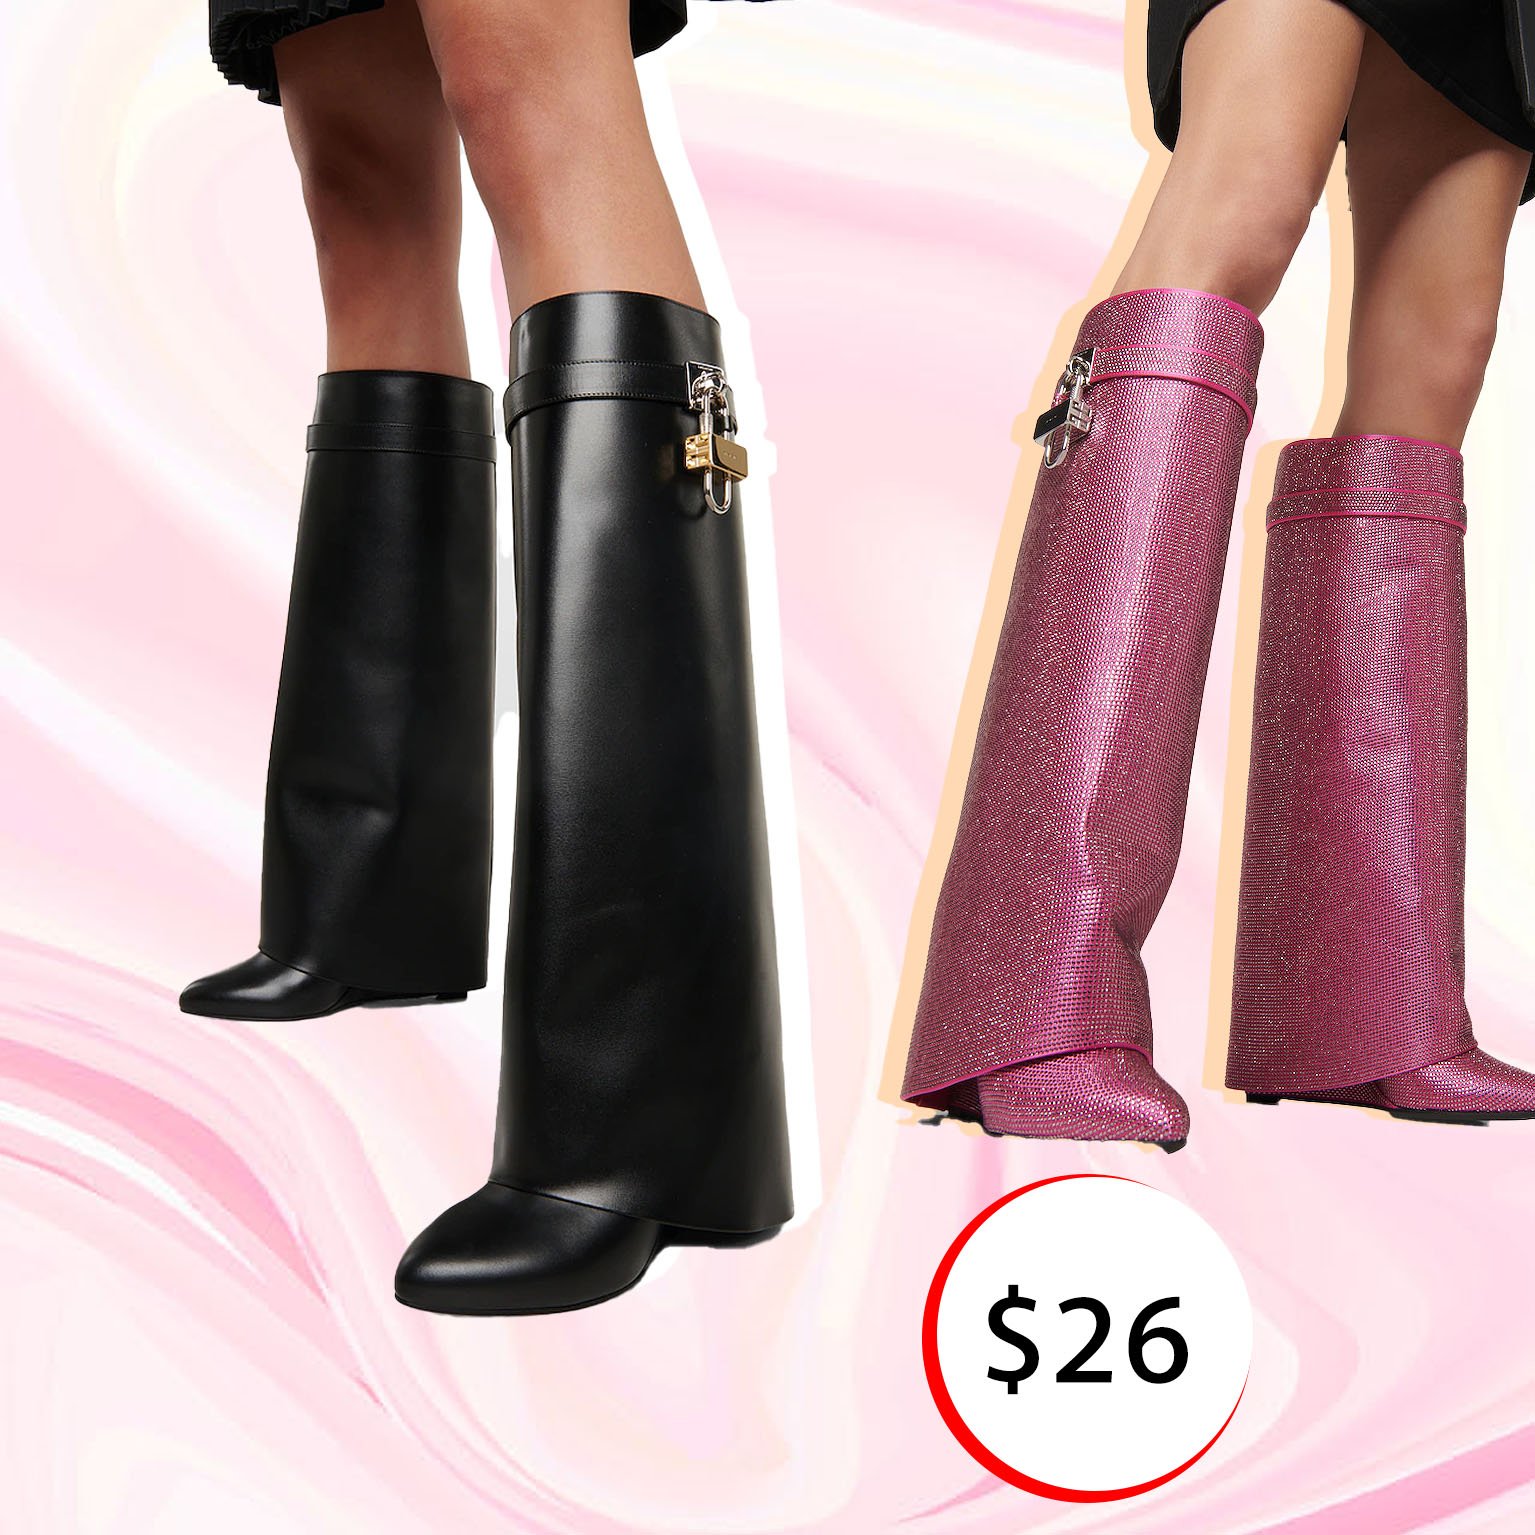 The Best Givenchy Shark Lock Boots Dupe From $26 - TheBestDupes